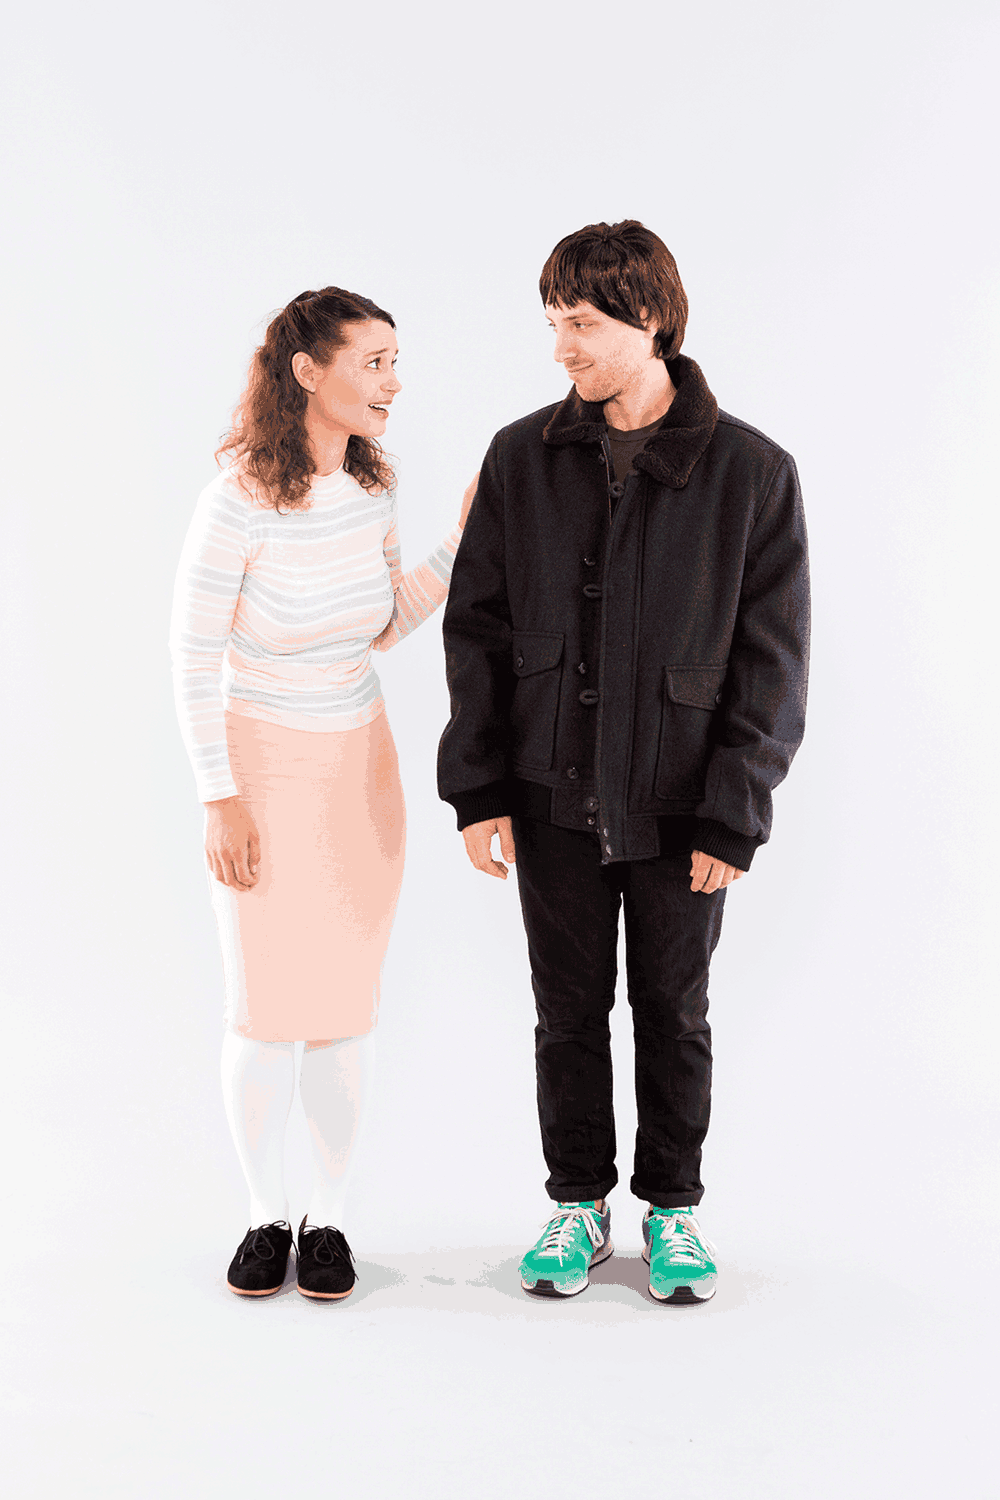 Nancy and Jonathan from Stranger Things costume